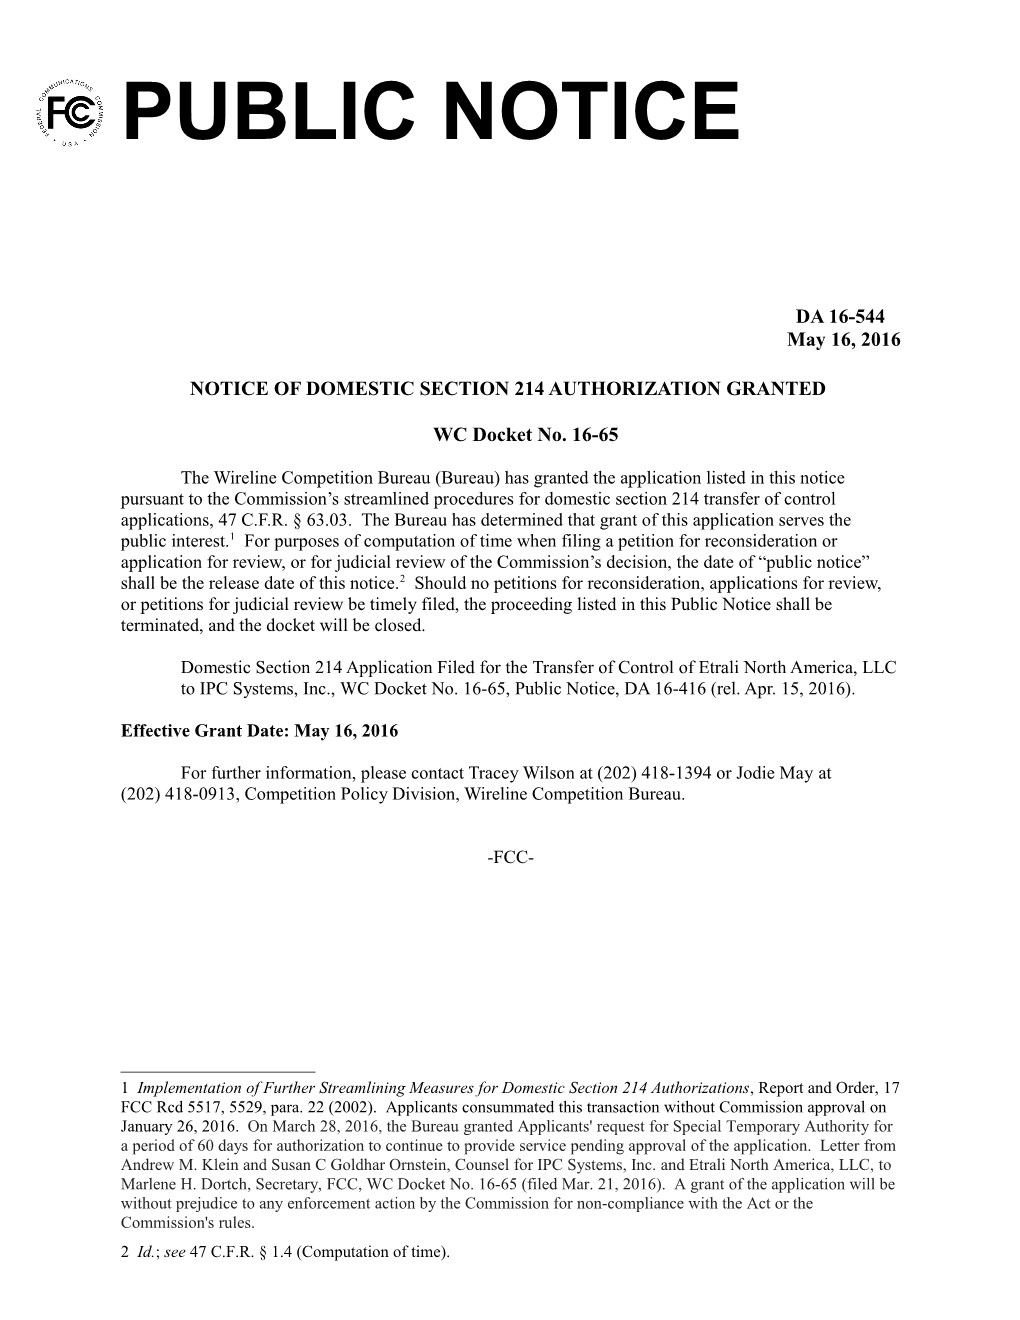 Notice of Domestic Section 214 Authorization Granted